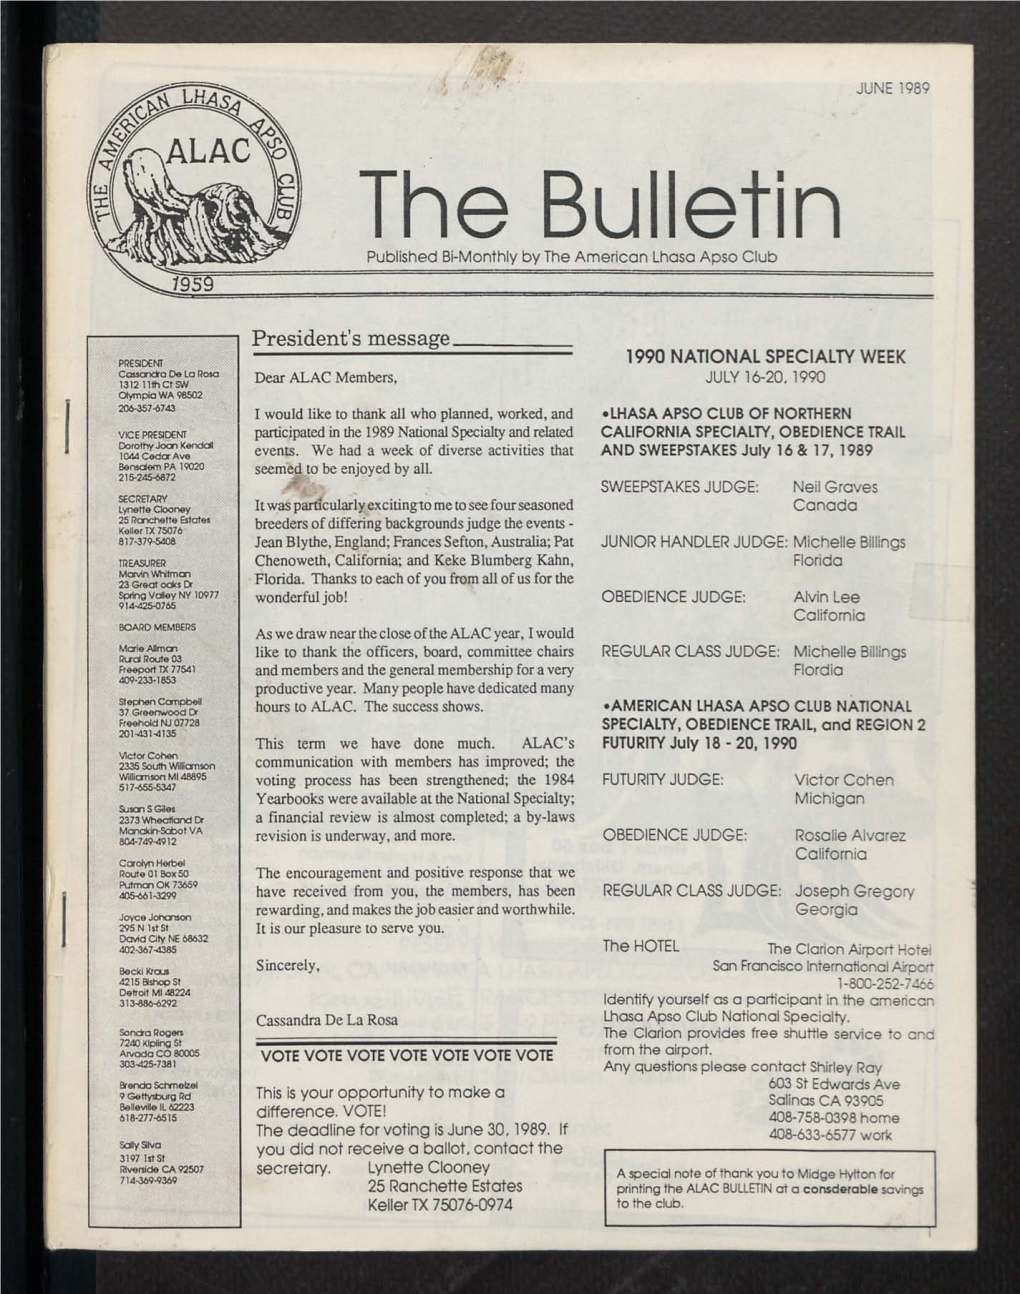 The Bulletin Published Bi-Monthly by the American Lhasa Apso Club